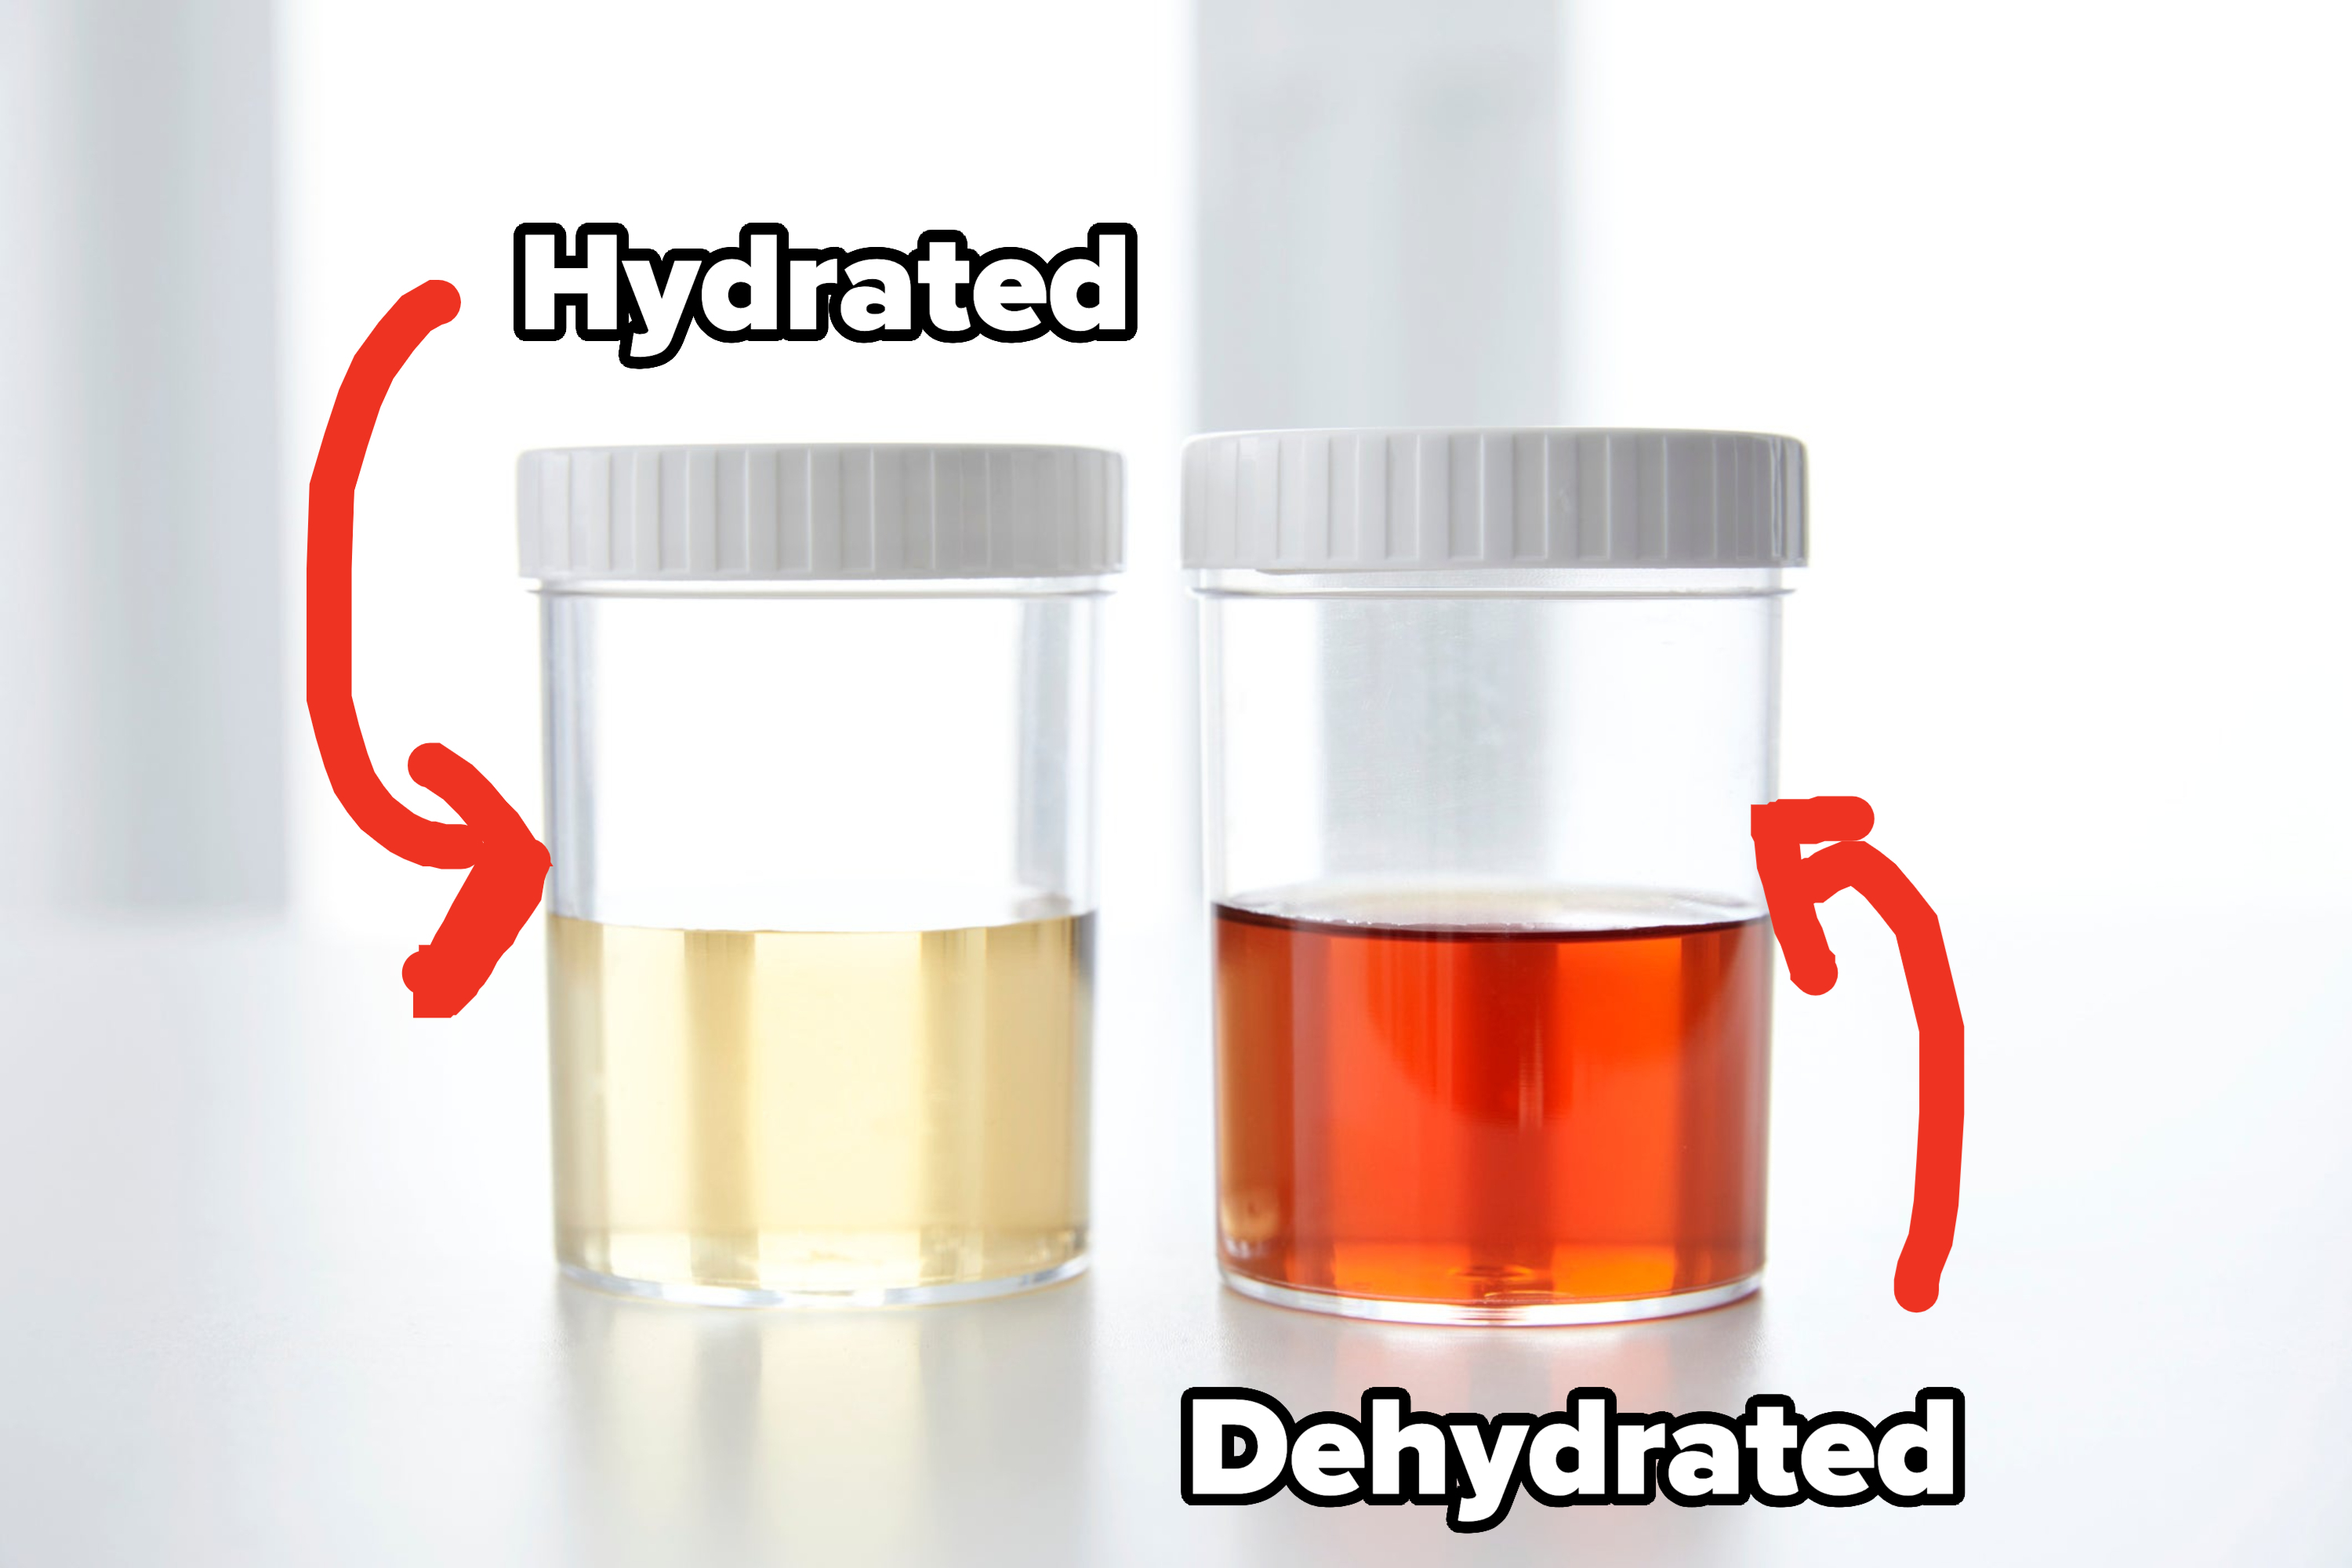 A glass with lighter liquid (marked &quot;hydrated&quot;) and another with rust-colored liquid (dehydrated)